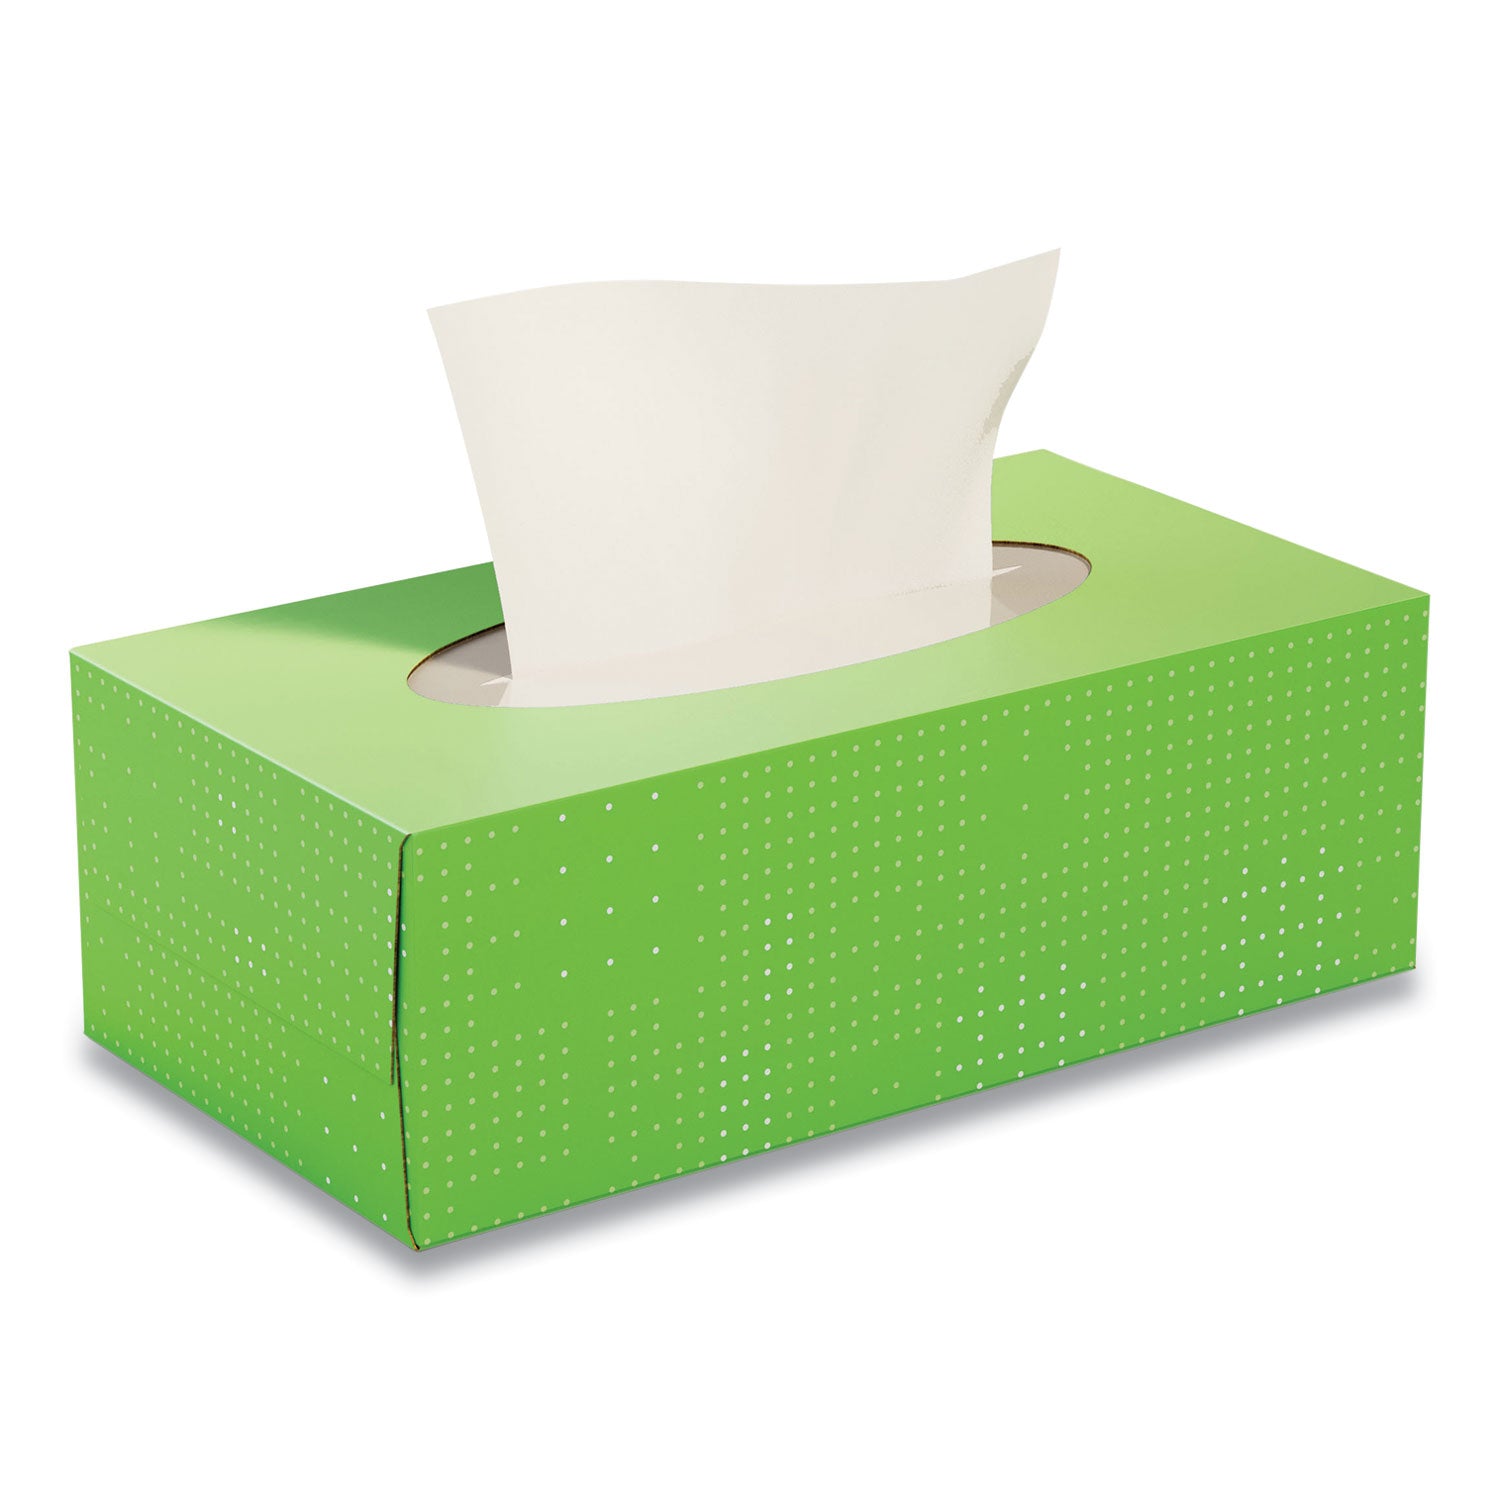 ultra-soft-standard-facial-tissue-2-ply-white-160-sheets-box-3-boxes-pack_prk24405544 - 2